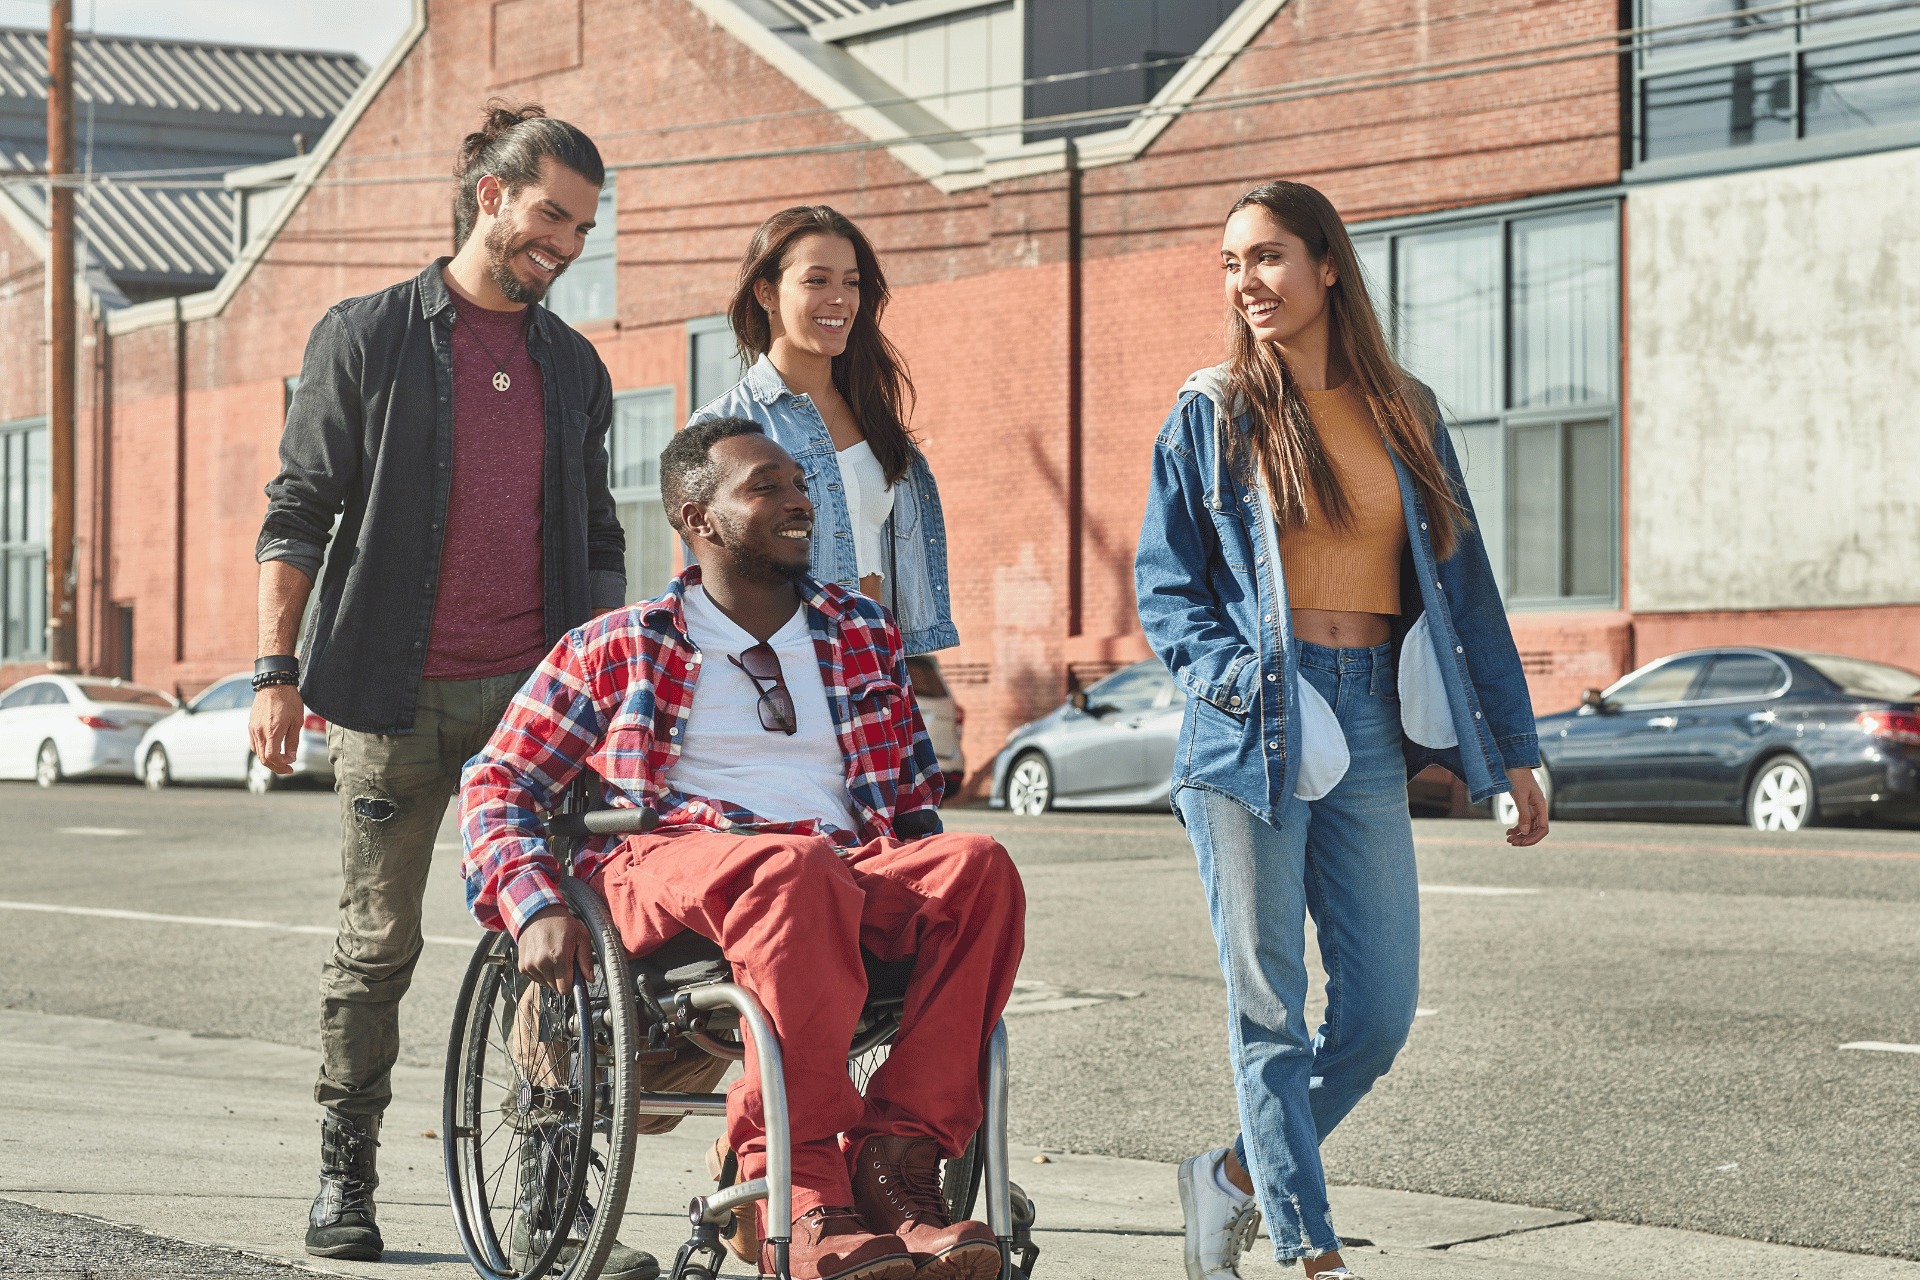 Group of people one in a wheelchair